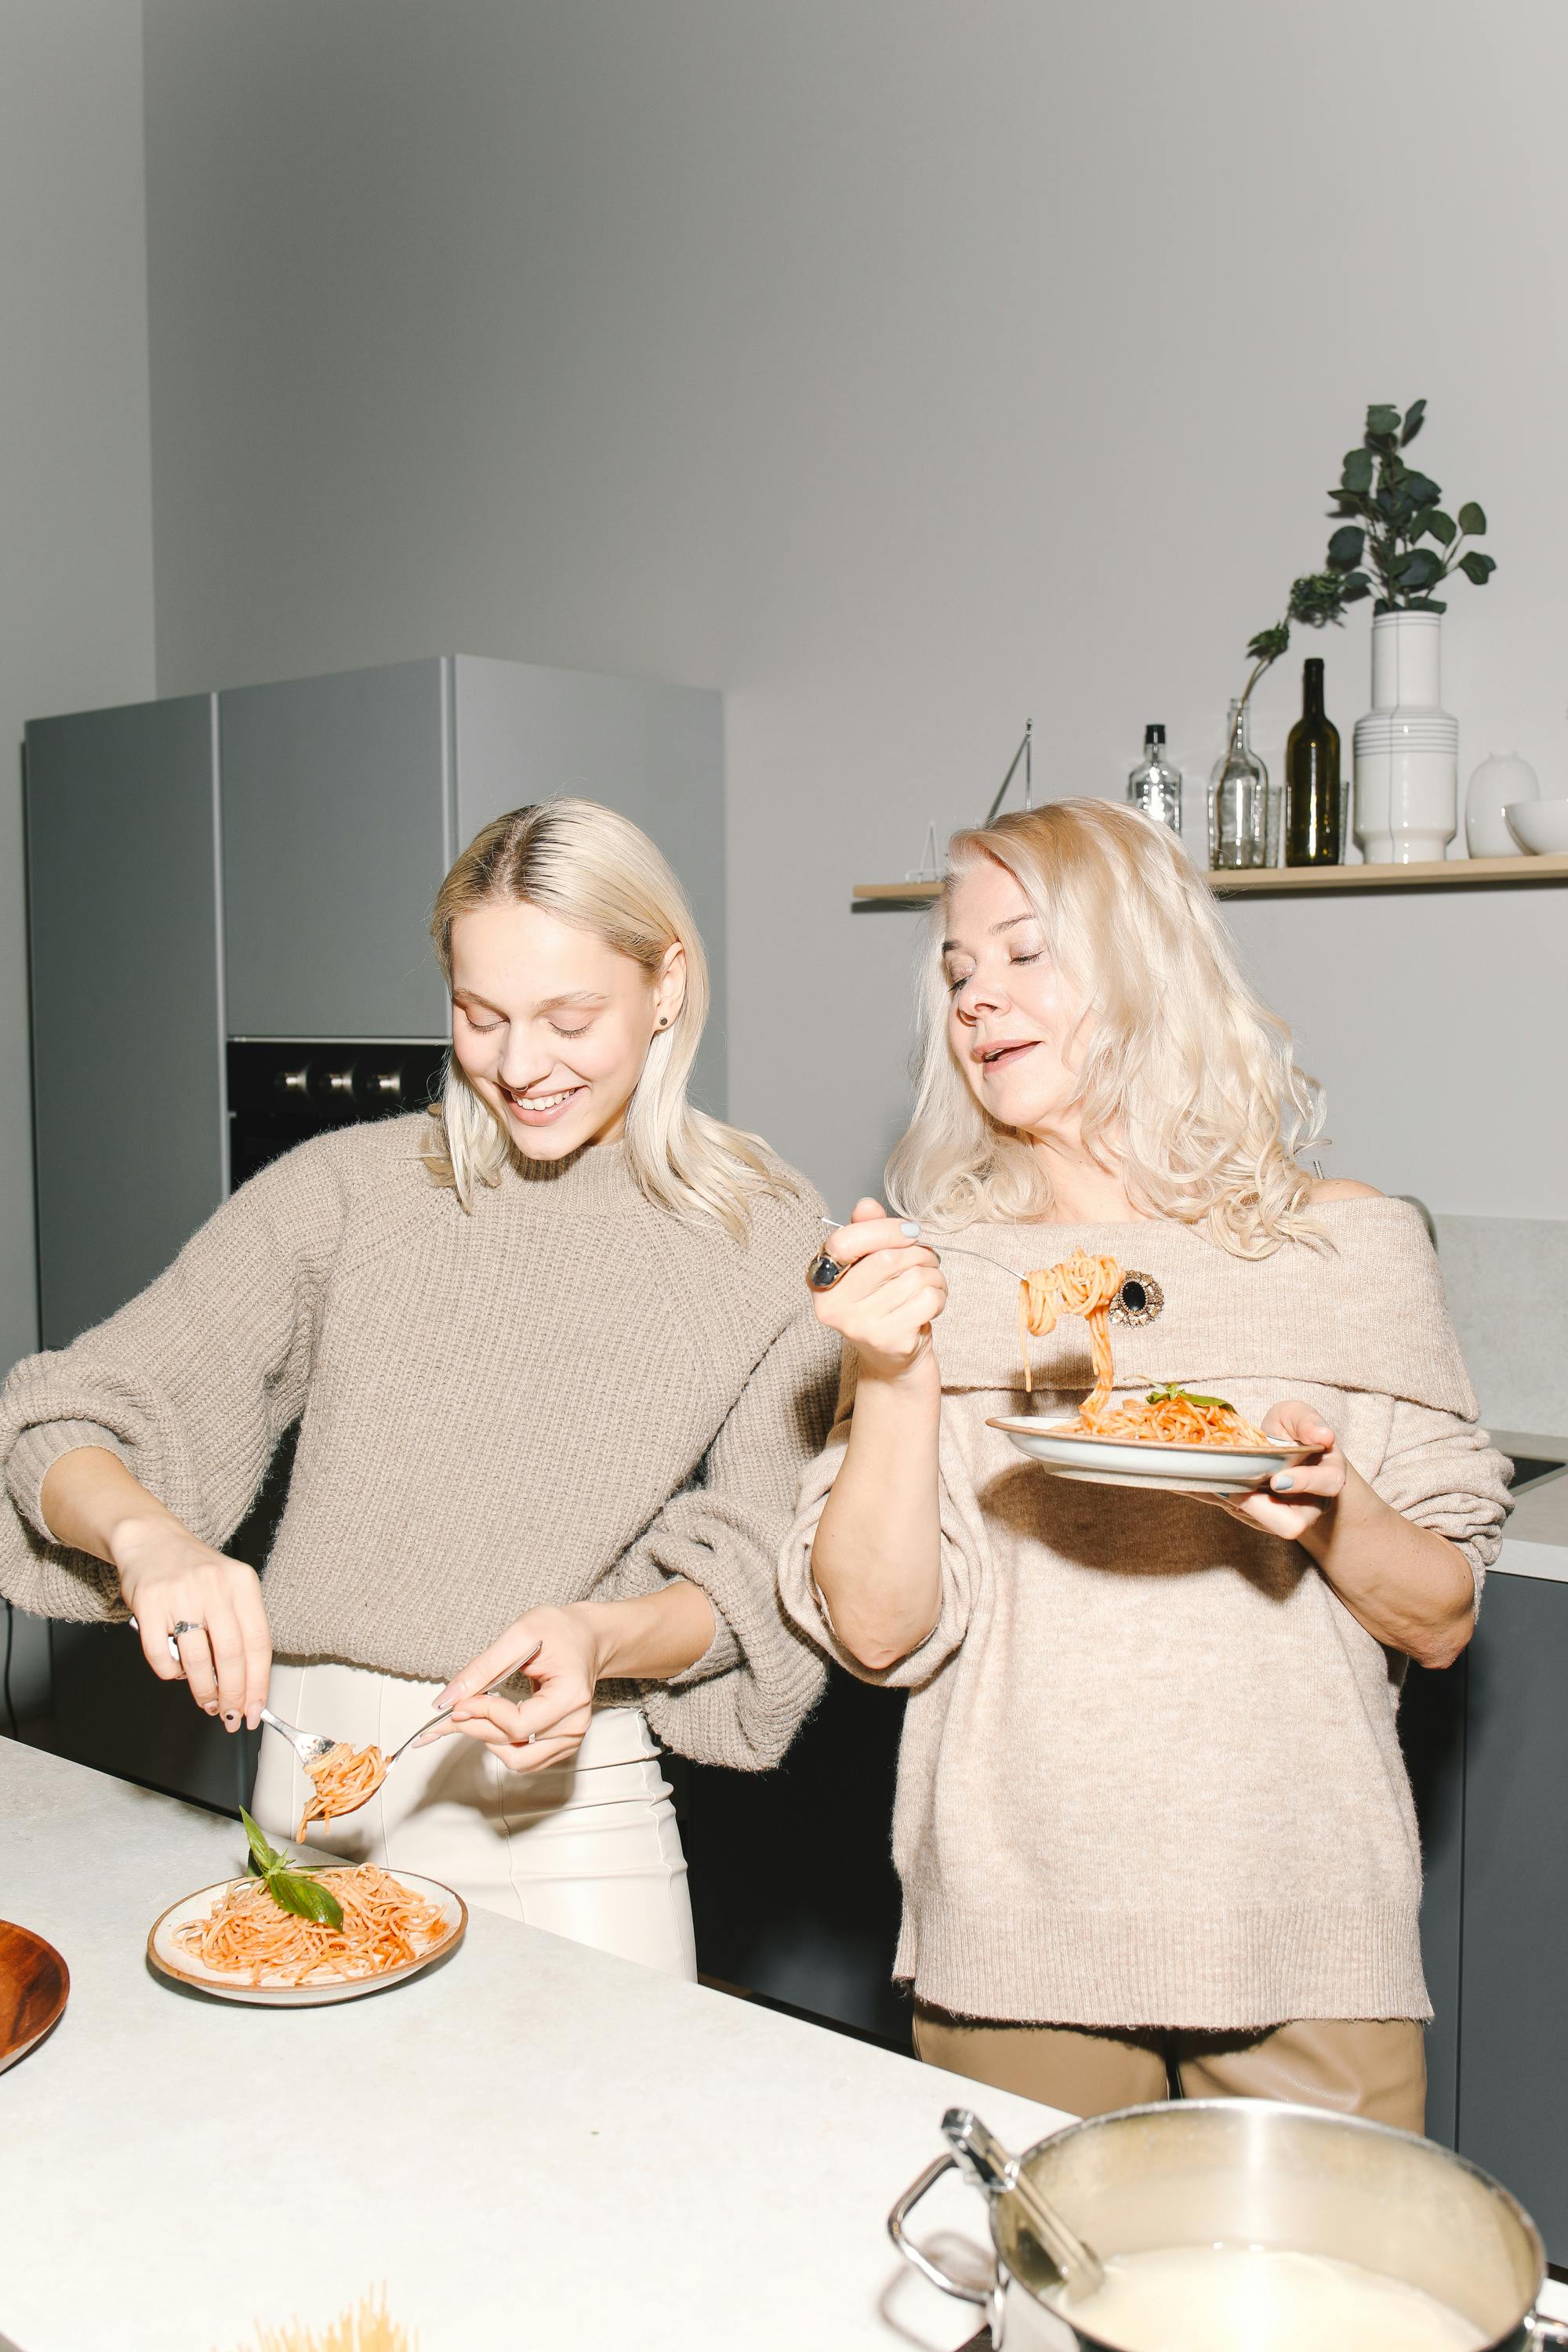 Family dining happily | Source: Pexels